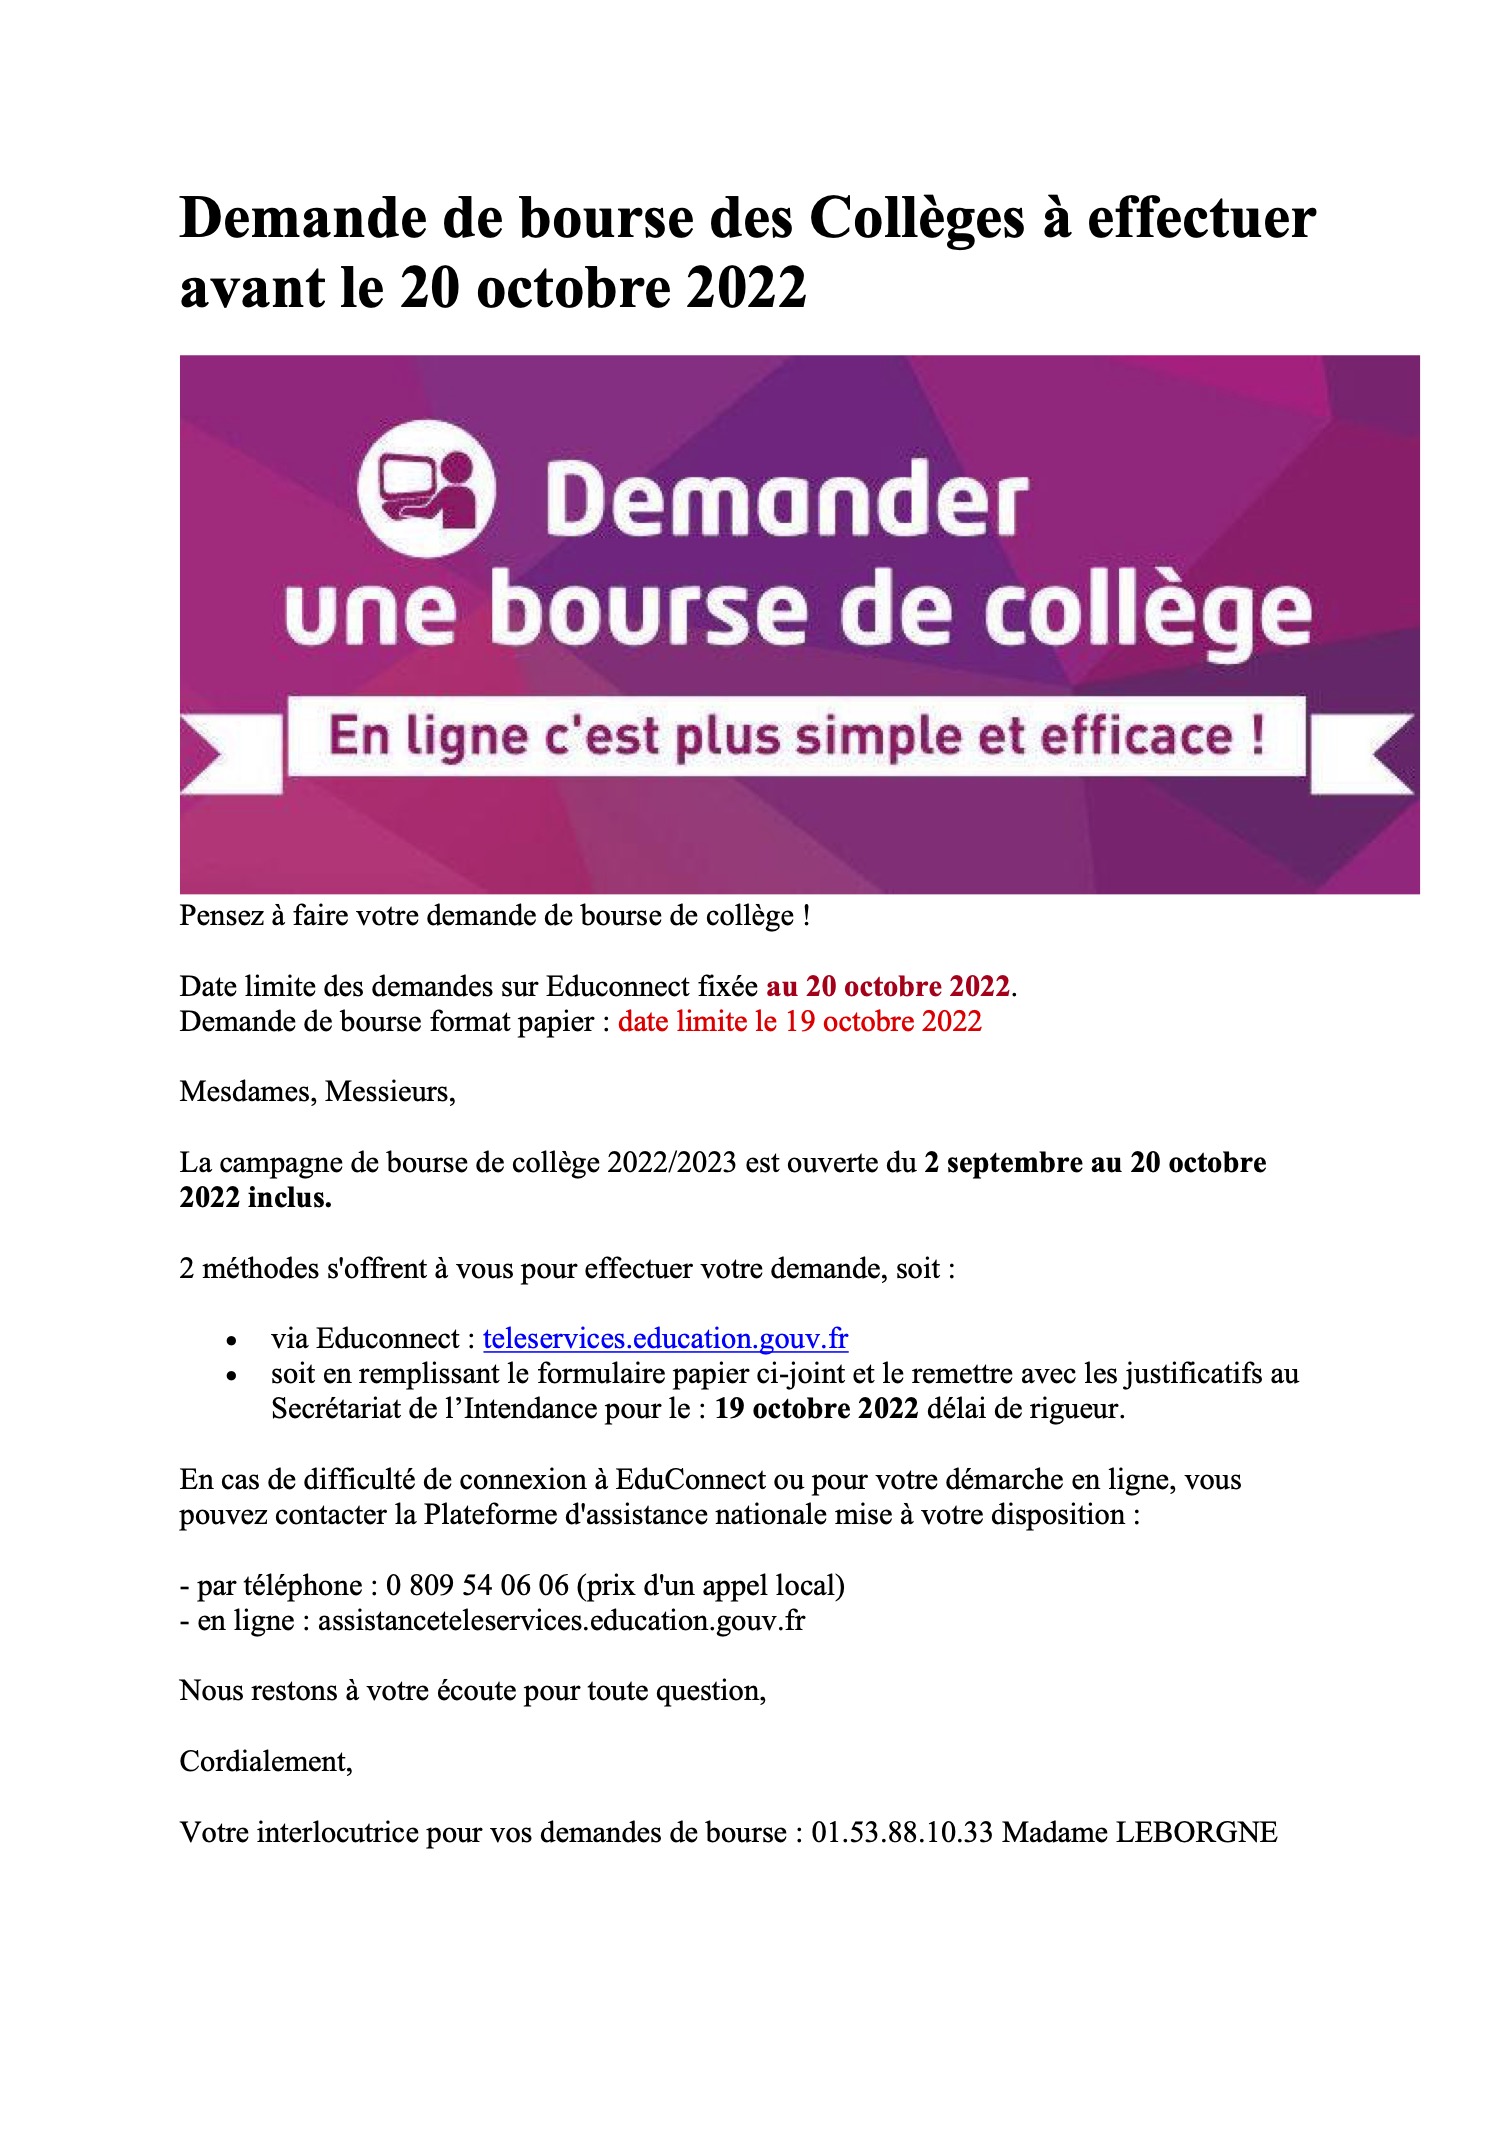 Consulter cet article